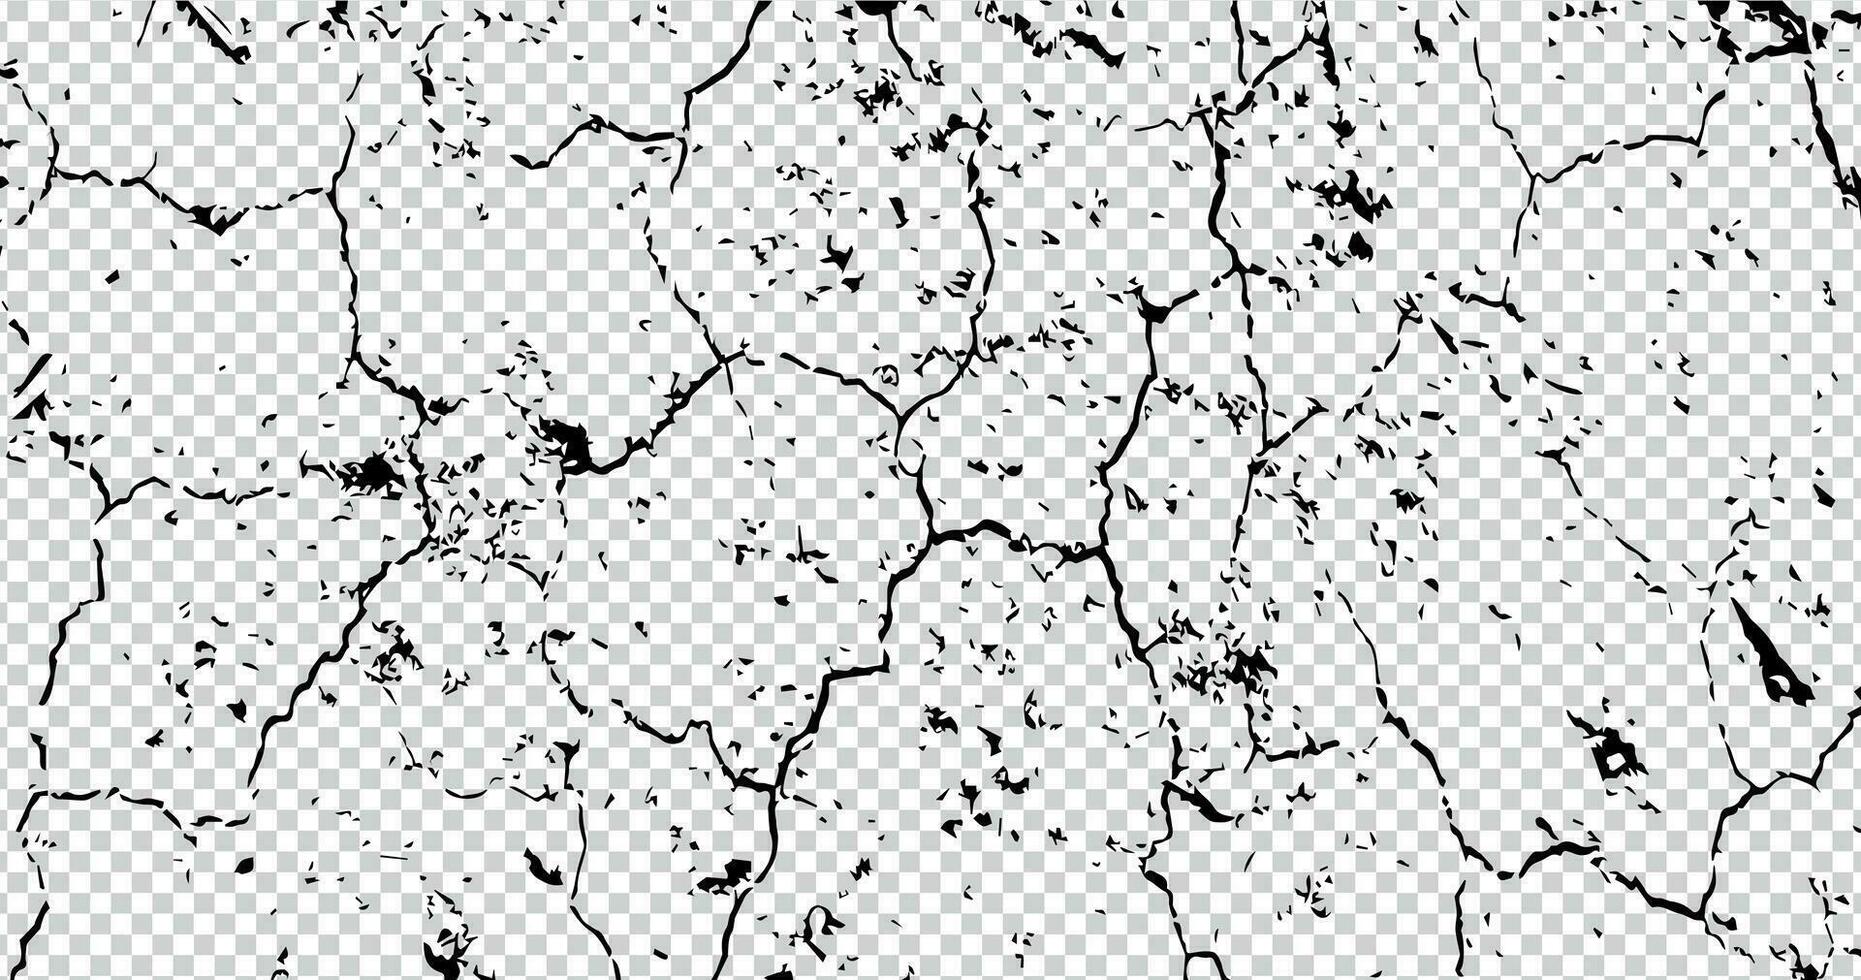 cracked concrete background with cracks and cracks, grungy texture vector